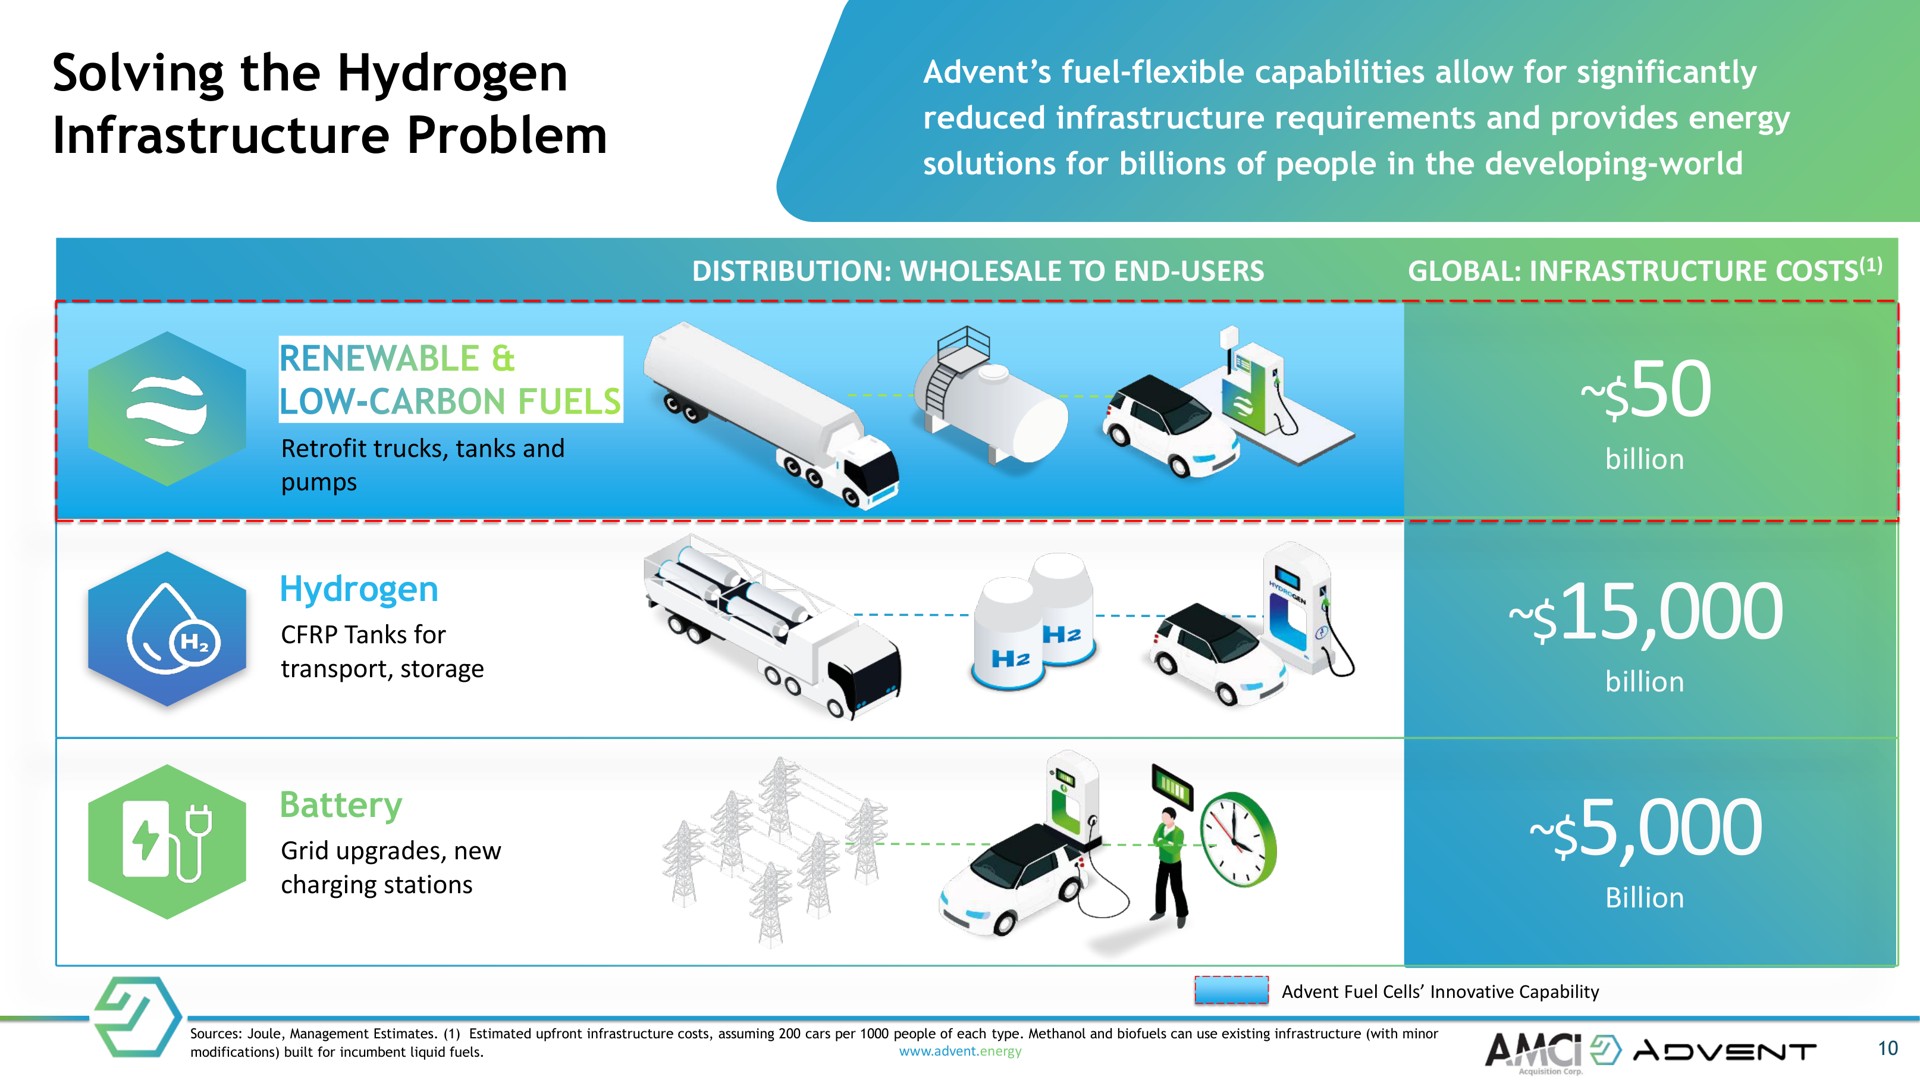 solving the hydrogen infrastructure problem fuel flexible capabilities allow for significantly reduced requirements and provides energy solutions for billions of people in developing world distribution wholesale to end users global costs renewable low carbon fuels billion tanks for transport storage to one new charging stations billion batt billion i a i sources joule management estimates estimated costs assuming cars per people of each type and can use existing with minor a modifications built for incumbent liquid fuels energy a corp | Advent